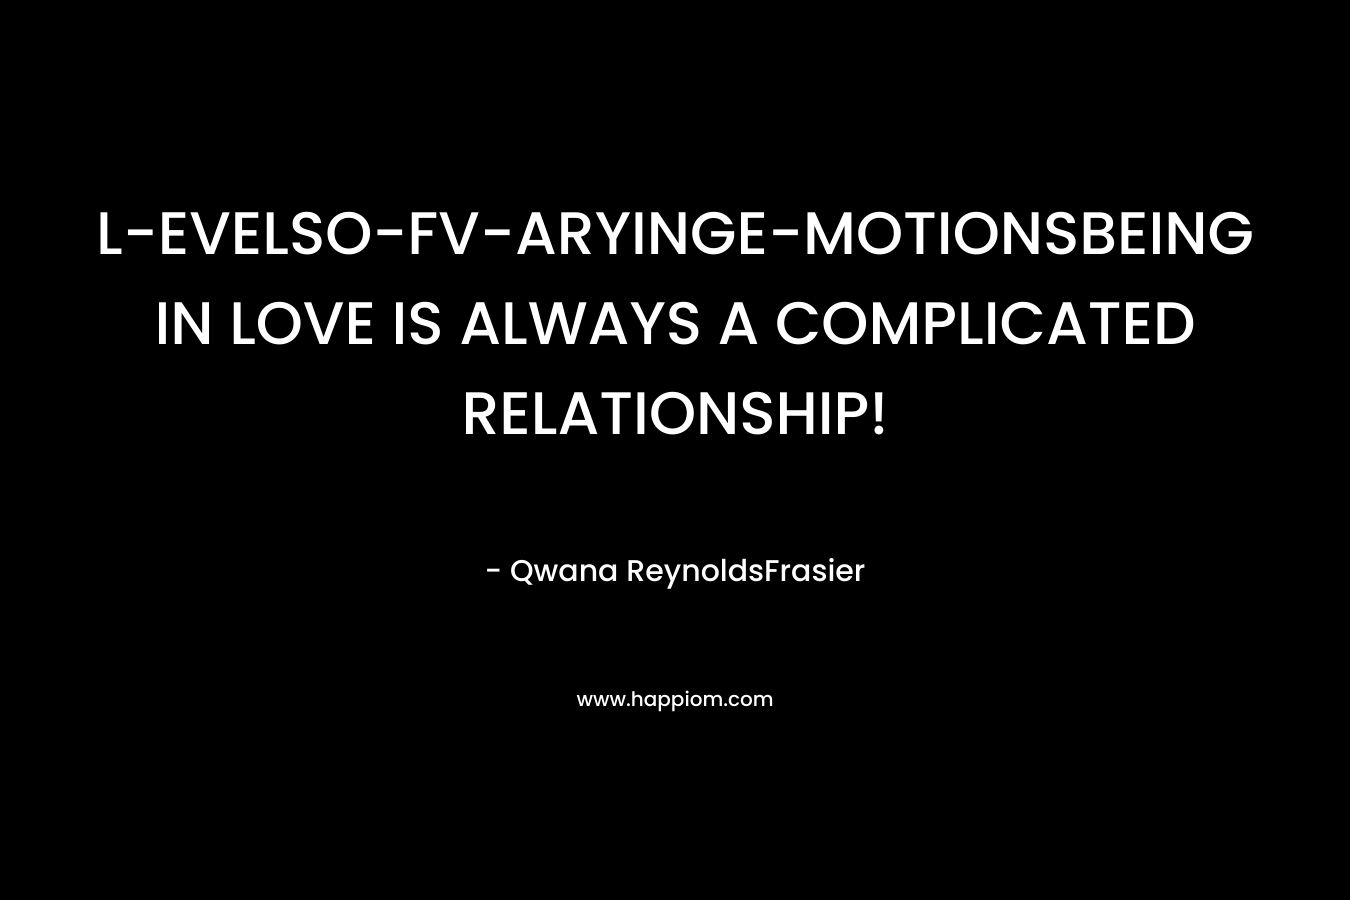 L-EVELSO-FV-ARYINGE-MOTIONSBEING IN LOVE IS ALWAYS A COMPLICATED RELATIONSHIP! – Qwana ReynoldsFrasier